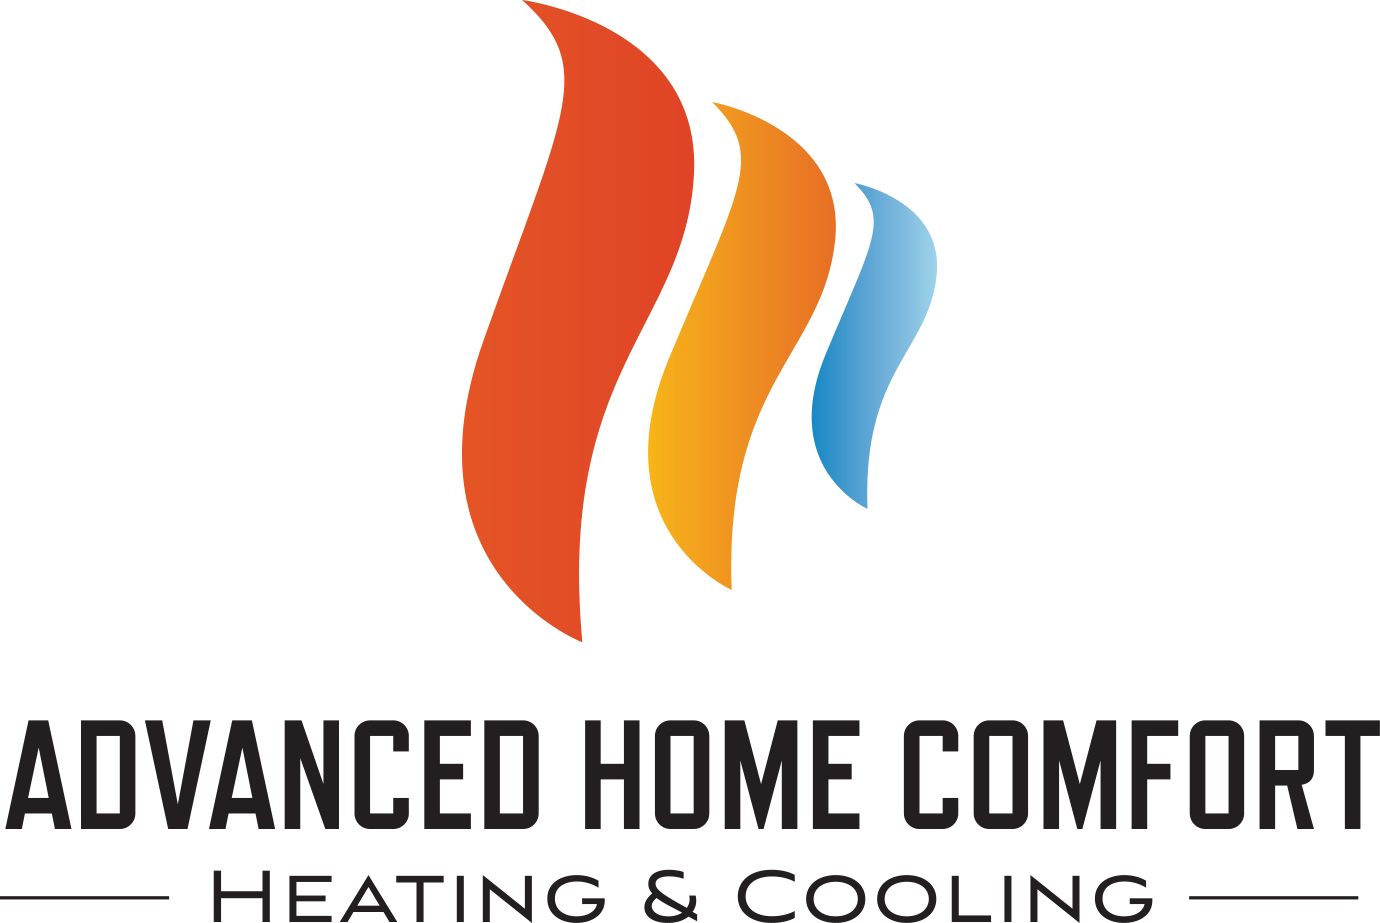 Advanced Home Comfort - trusted HVAC experts.